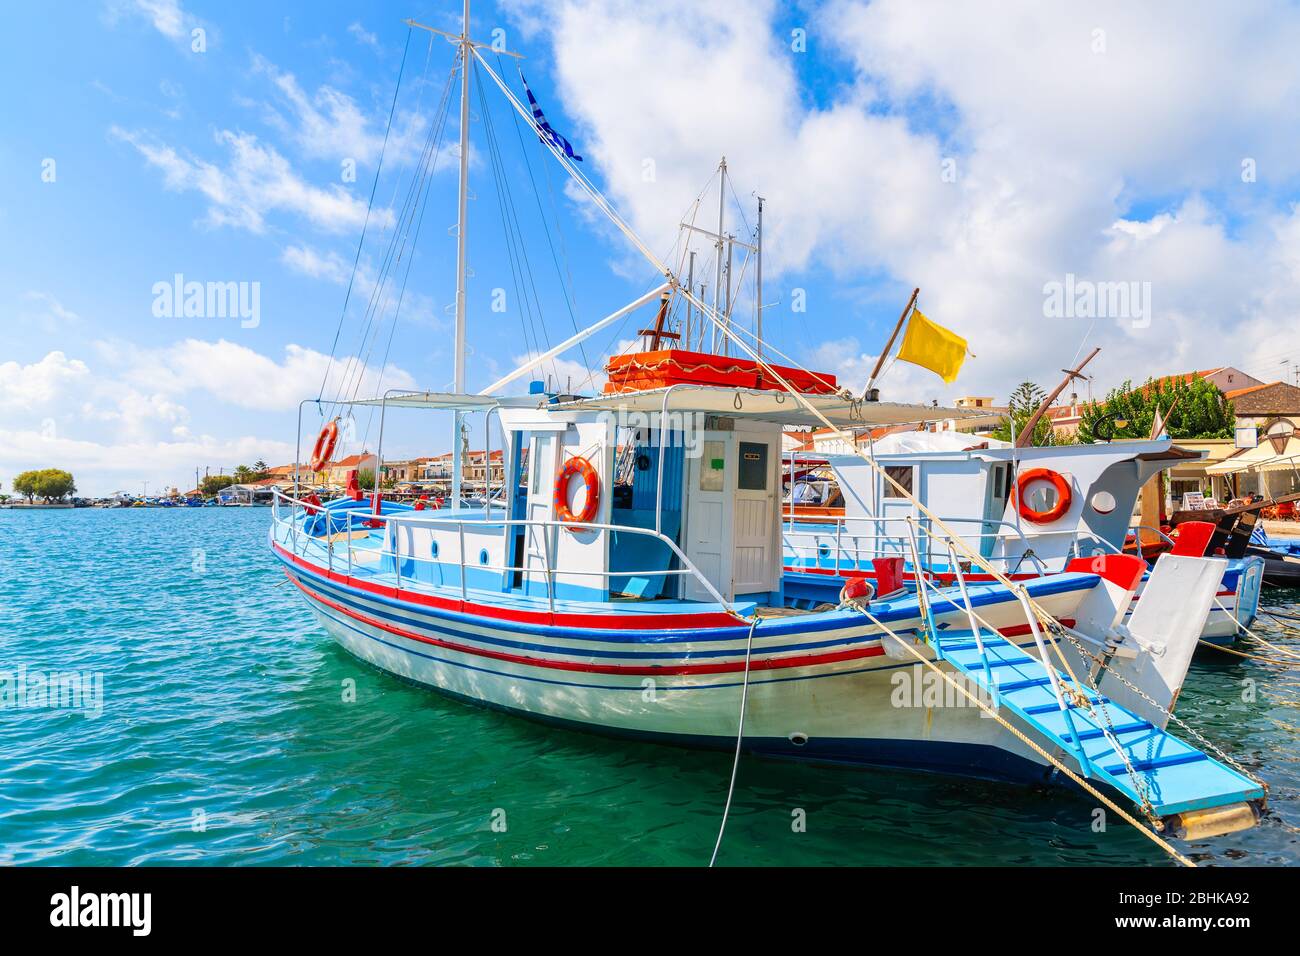 Typical colourful fishing boat in Pythagorion port, Samos island, Greece Stock Photo